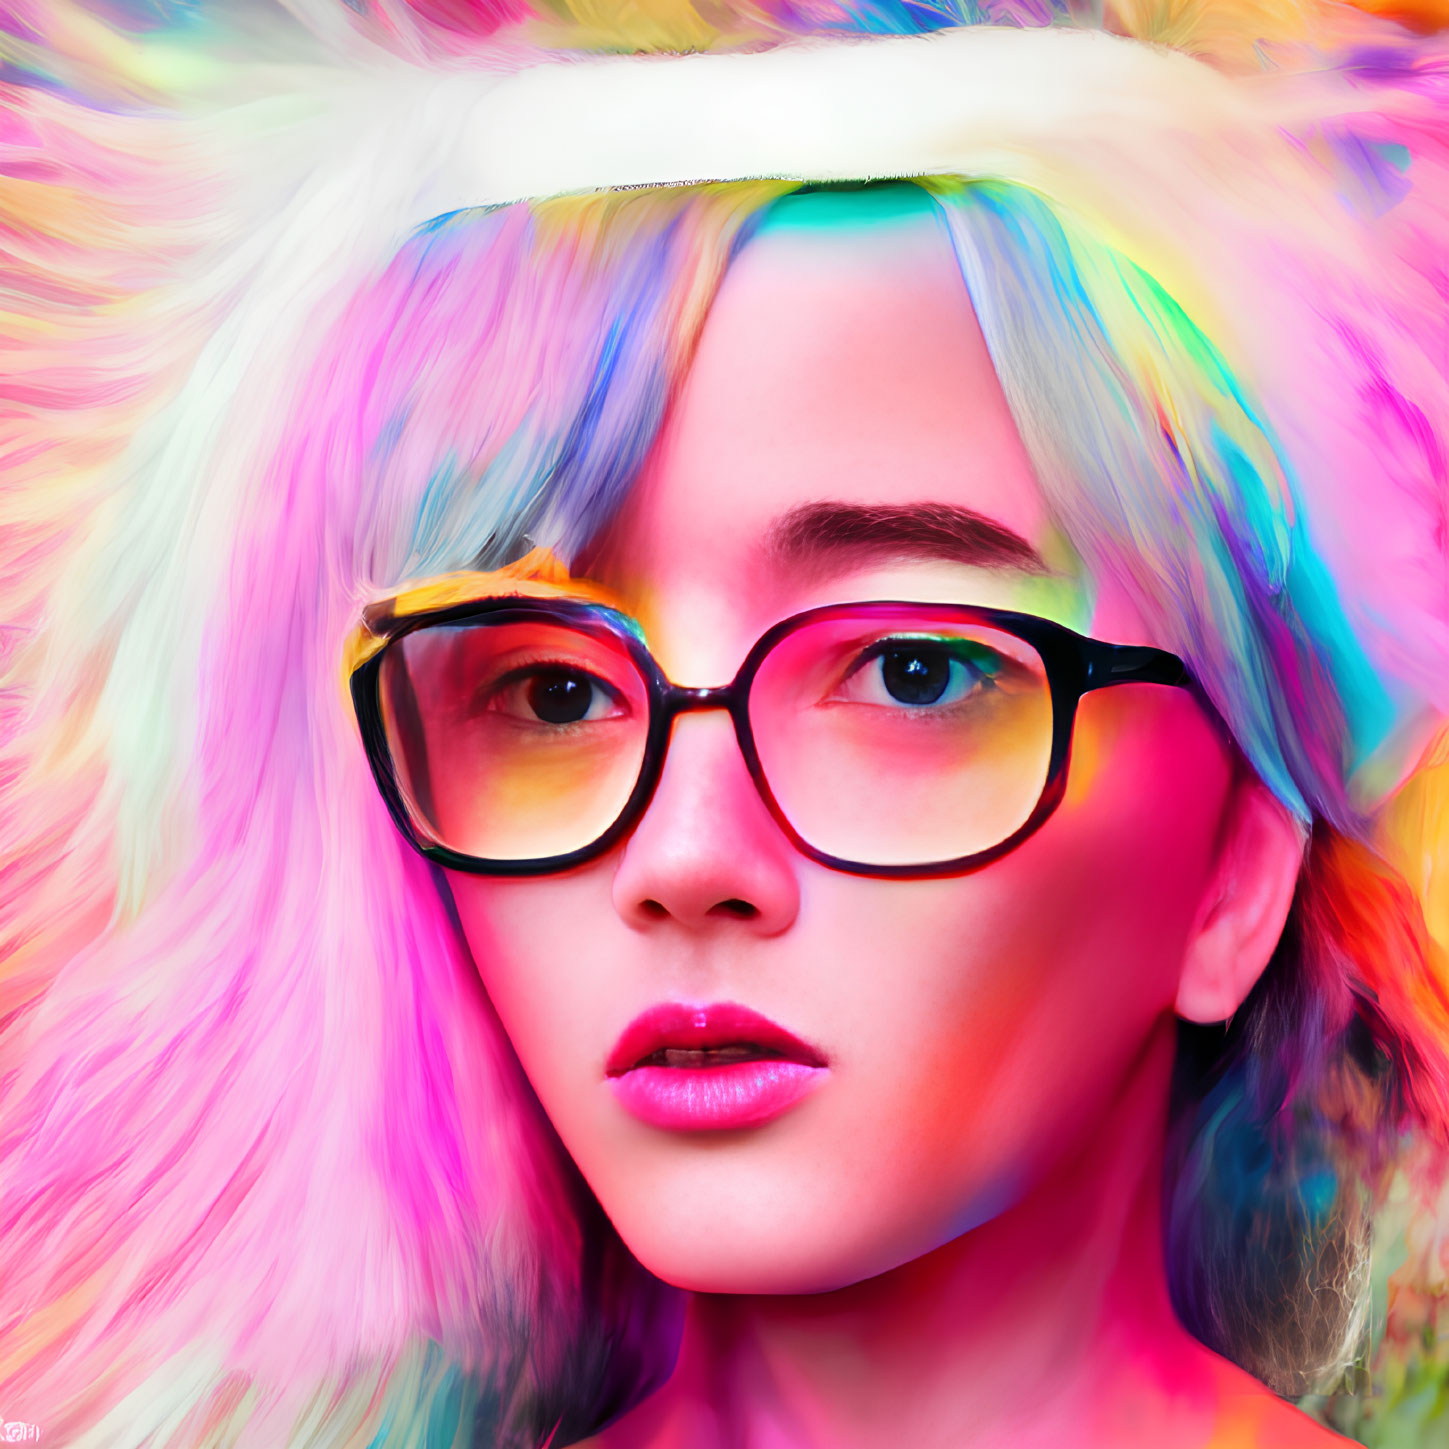 Colorful portrait of person with glasses and headband against swirling background